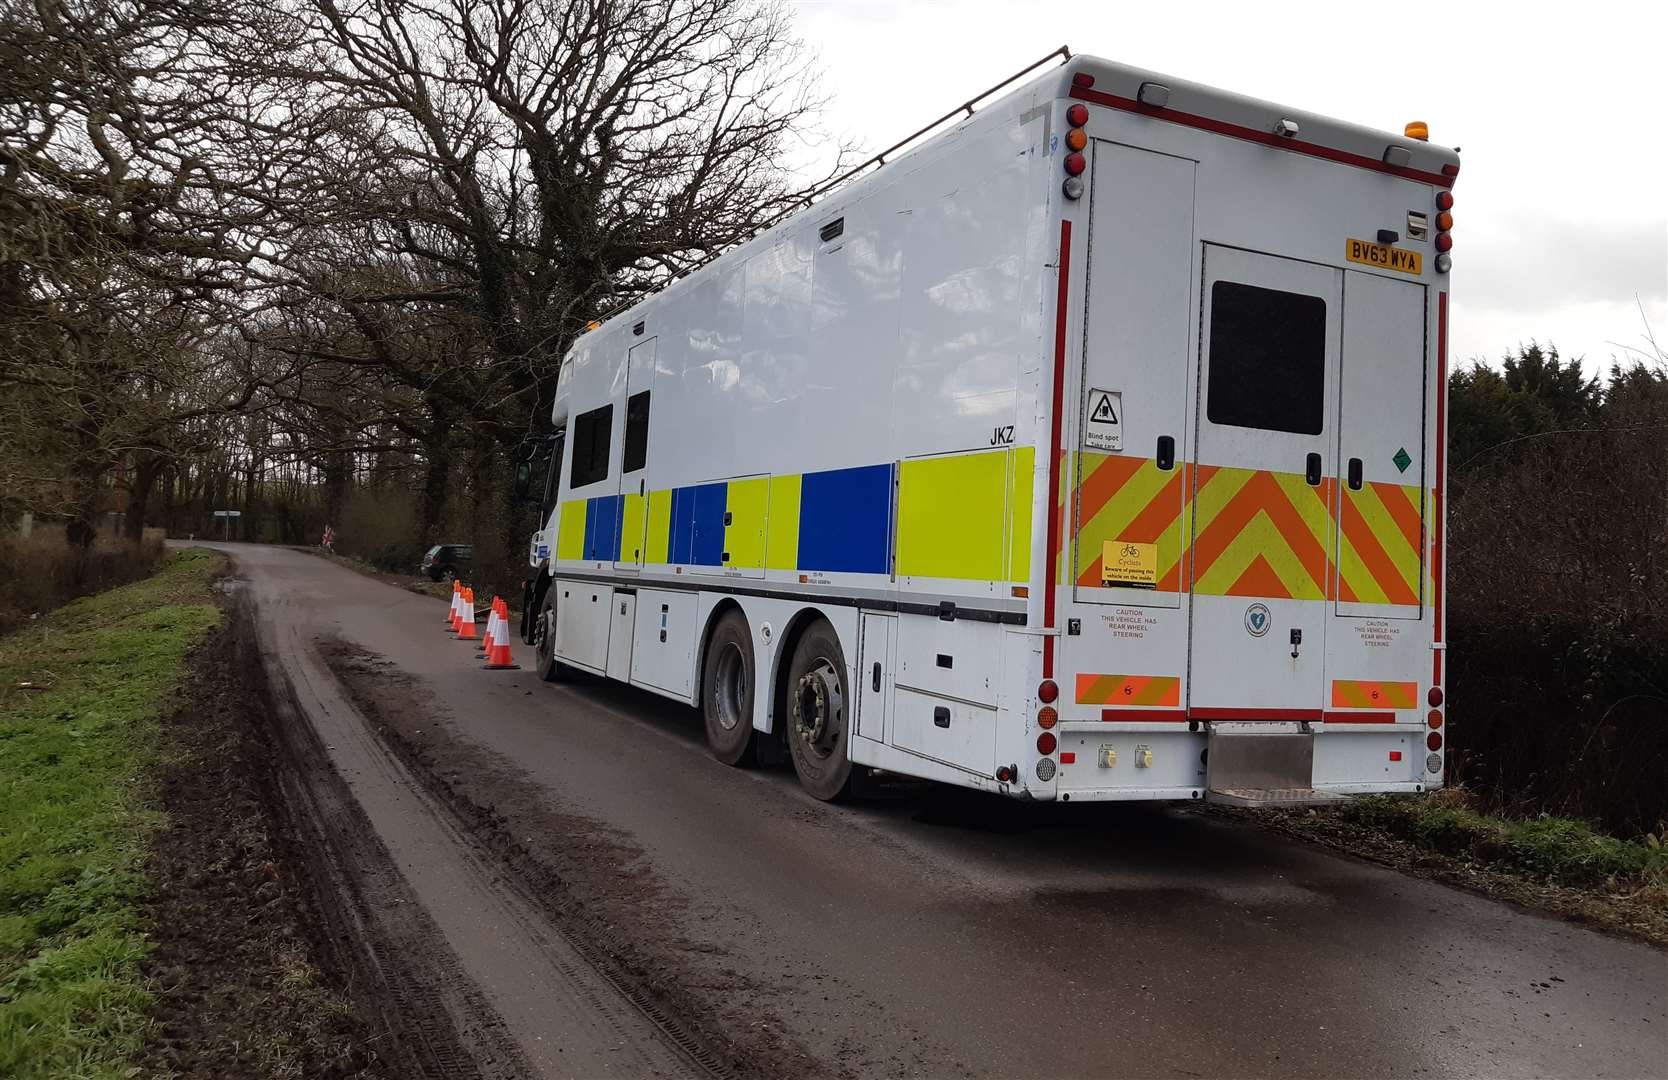 A diving team truck arrived in Bears Lane in March as part of the investigation